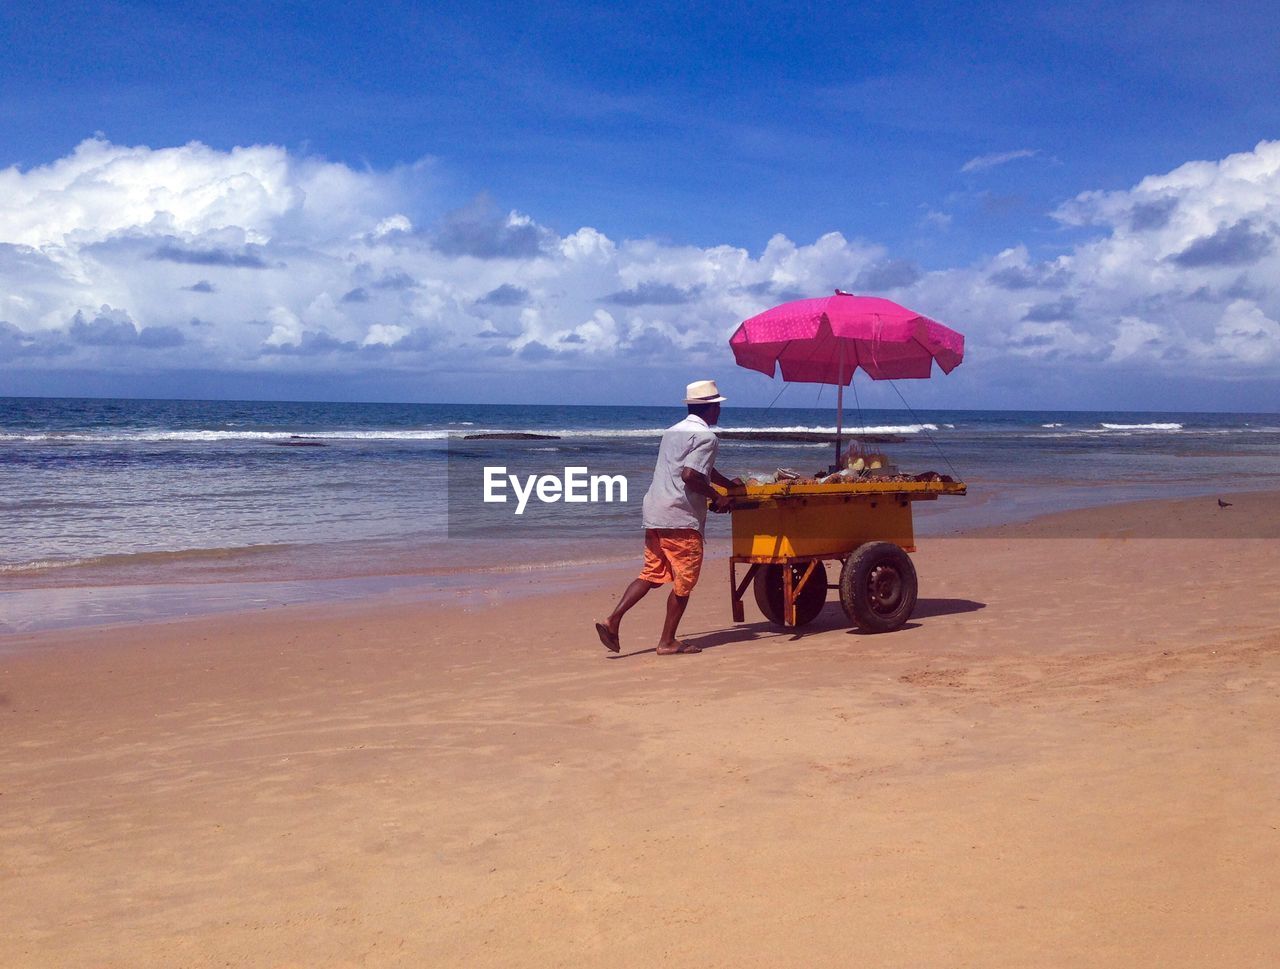 Vendor pushing concession cart at beach against sky